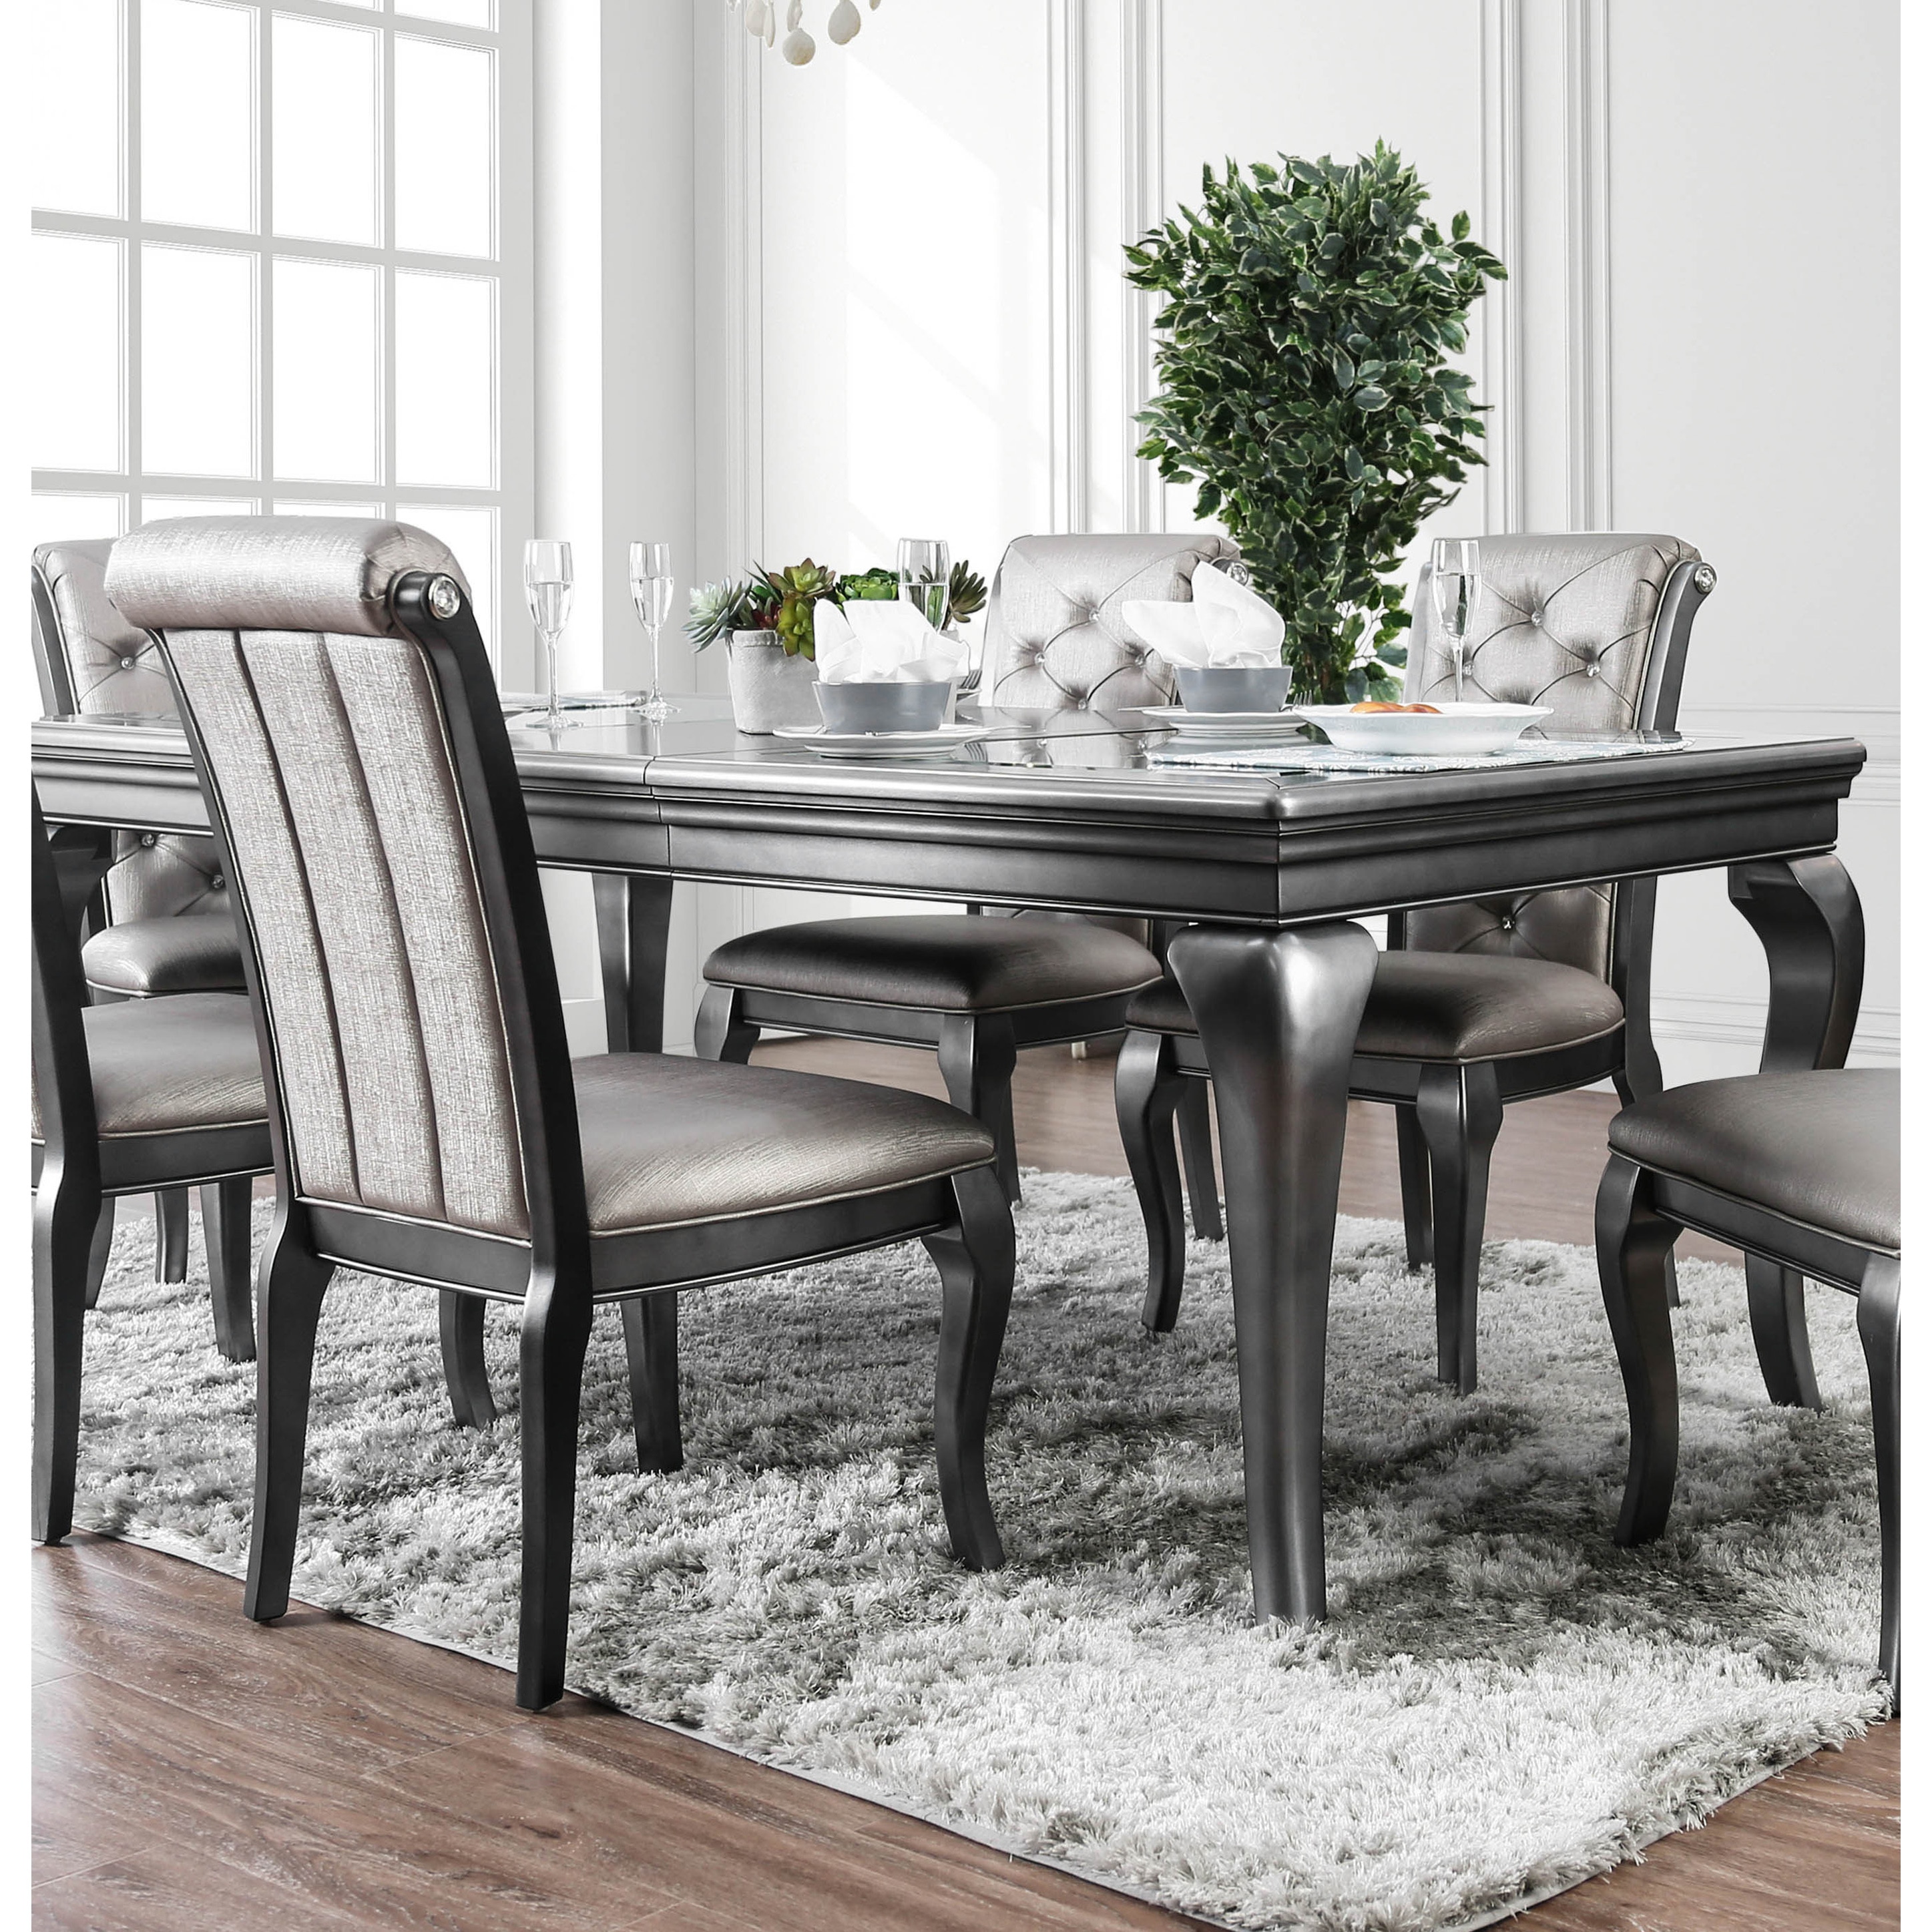 Furniture of America Tily Glam Grey 8-inch Solid Wood Dining Table